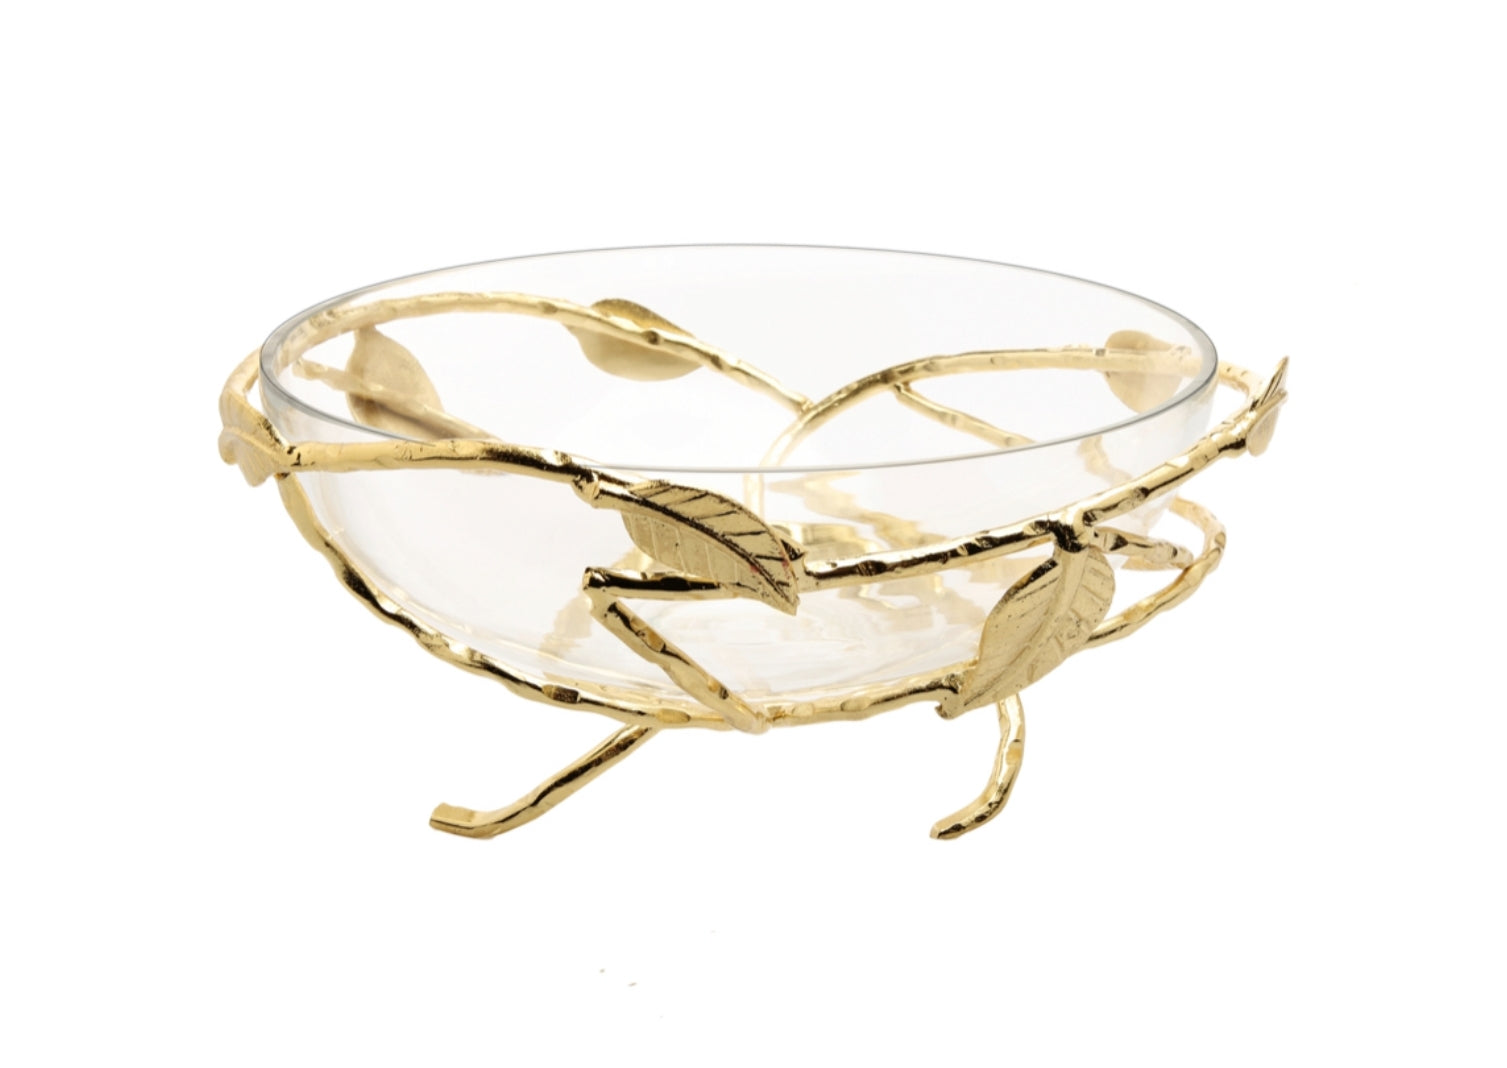 Gold Salad Bowl with Removable Glass